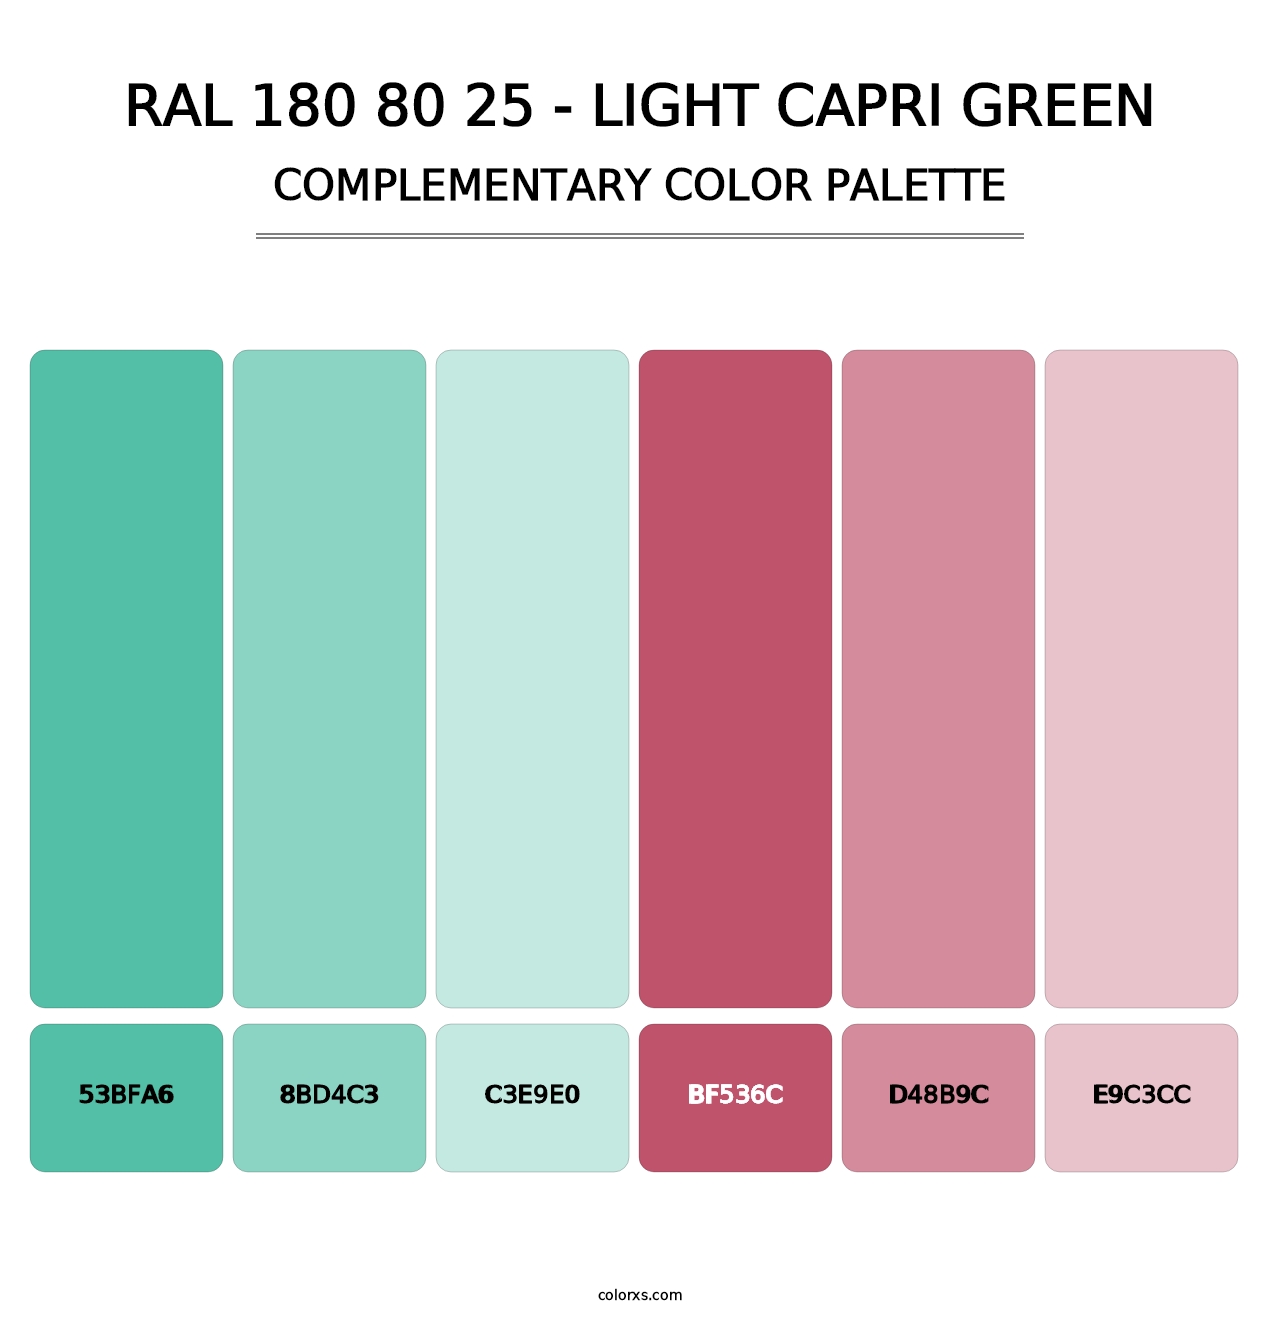 RAL 180 80 25 - Light Capri Green - Complementary Color Palette